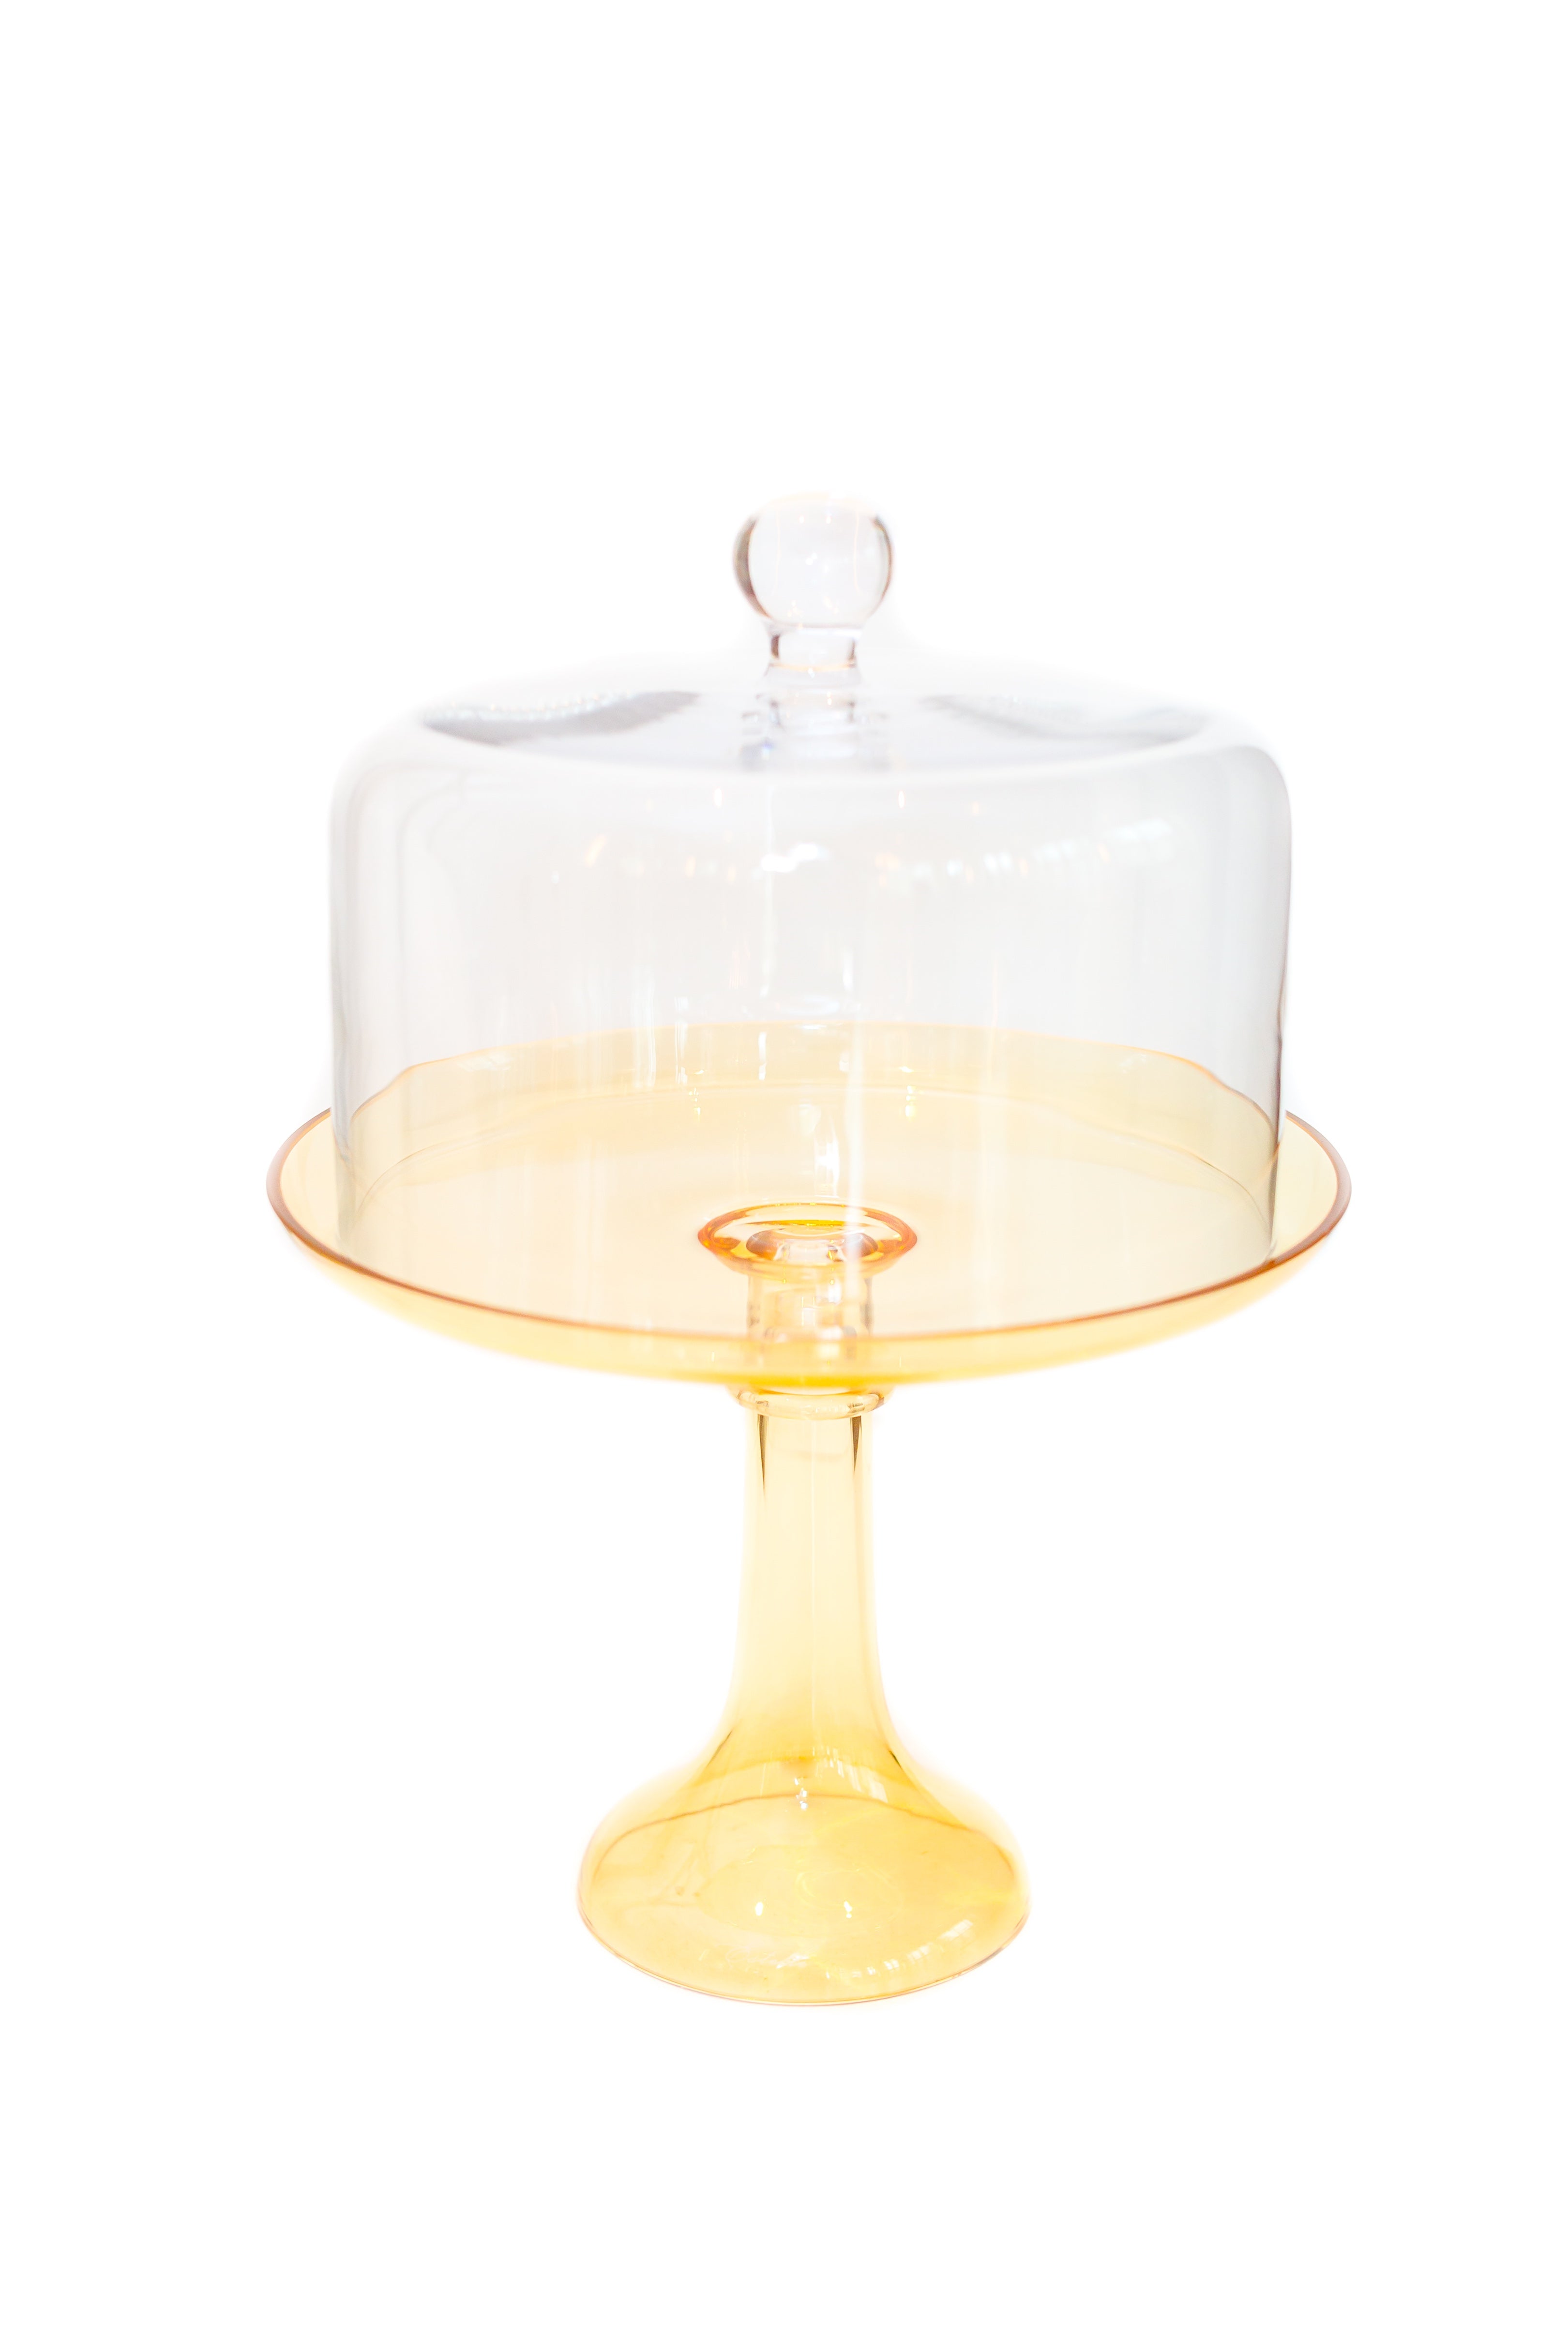 Amazon.com | Galashield Marble Cake Stand with Dome | Cake Plate with Glass Dome  Cake Cover: Cake Stands